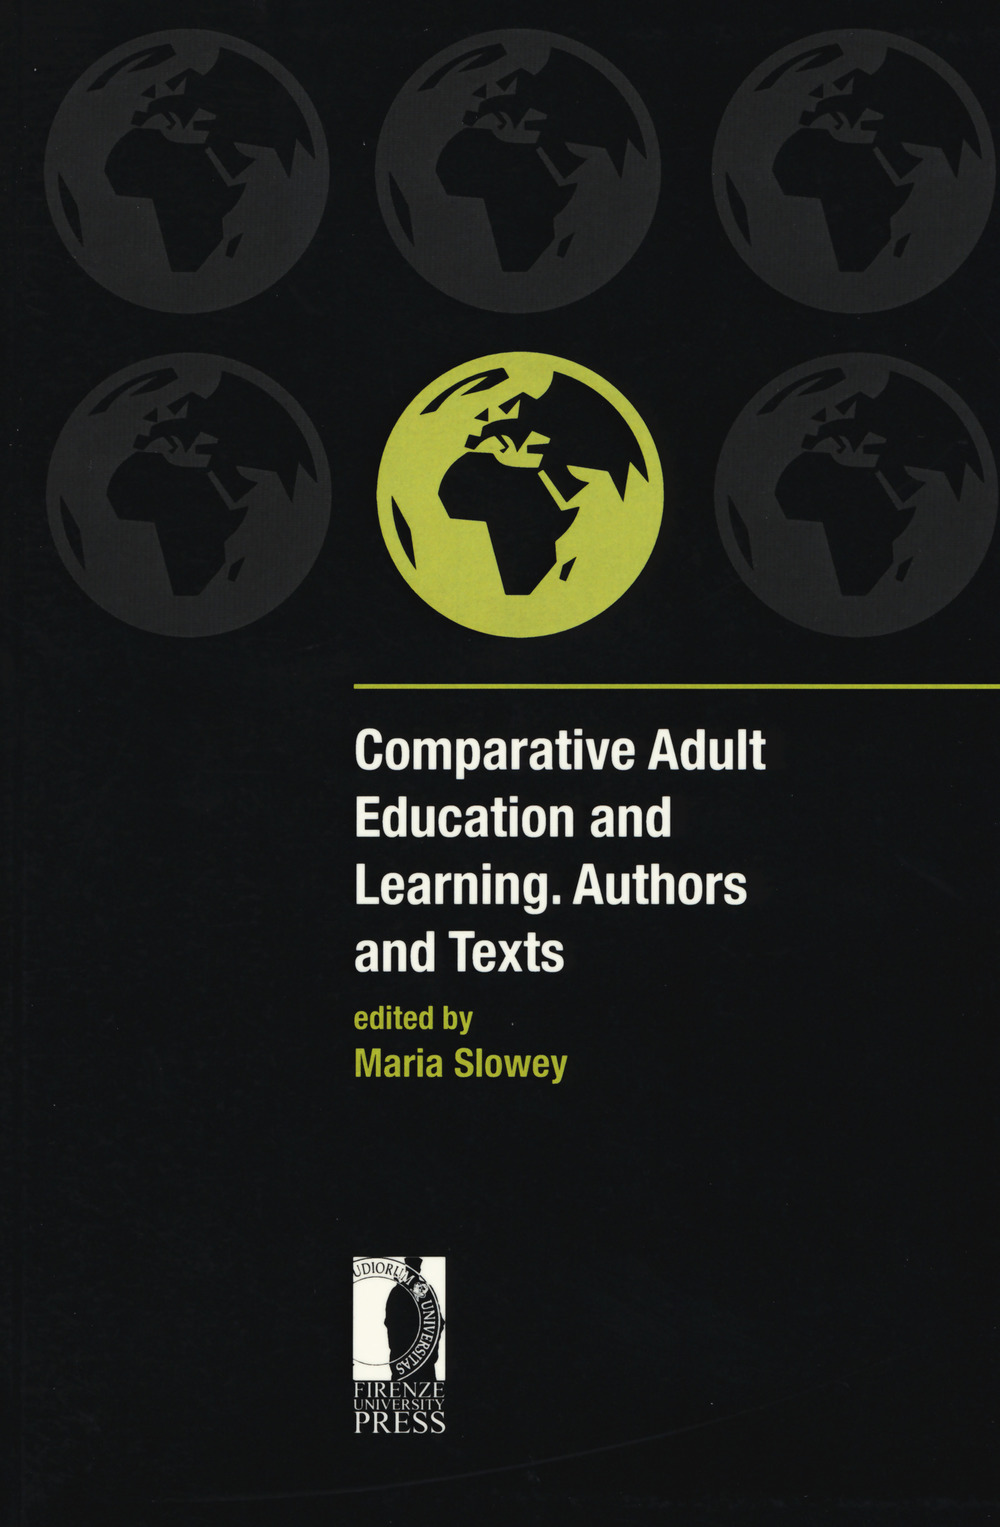 Comparative adult education and learning. Authors and texts